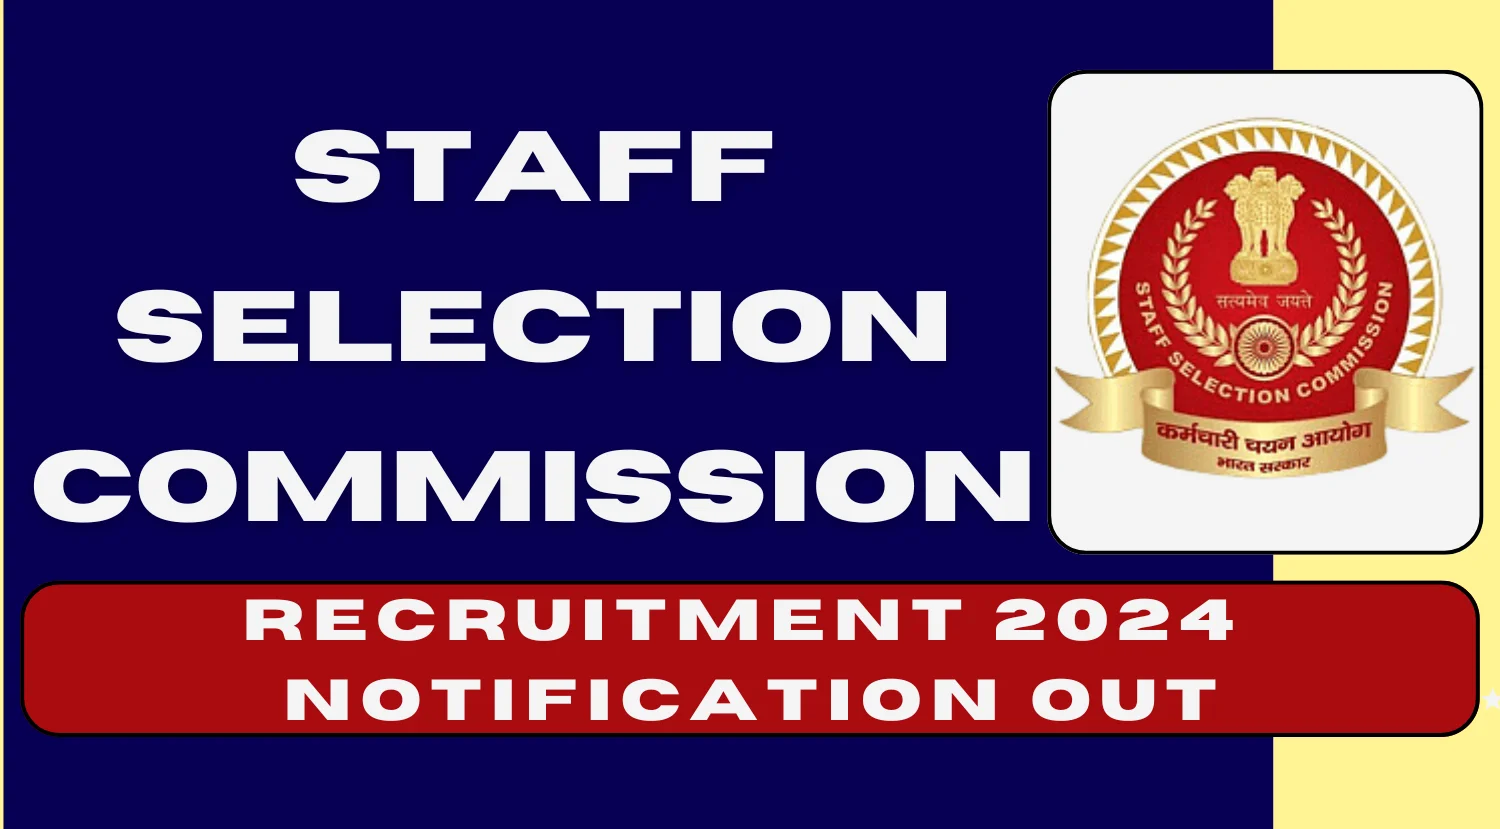 Staff Selection Commission (SSC) Recruitment 2024 Notification Out